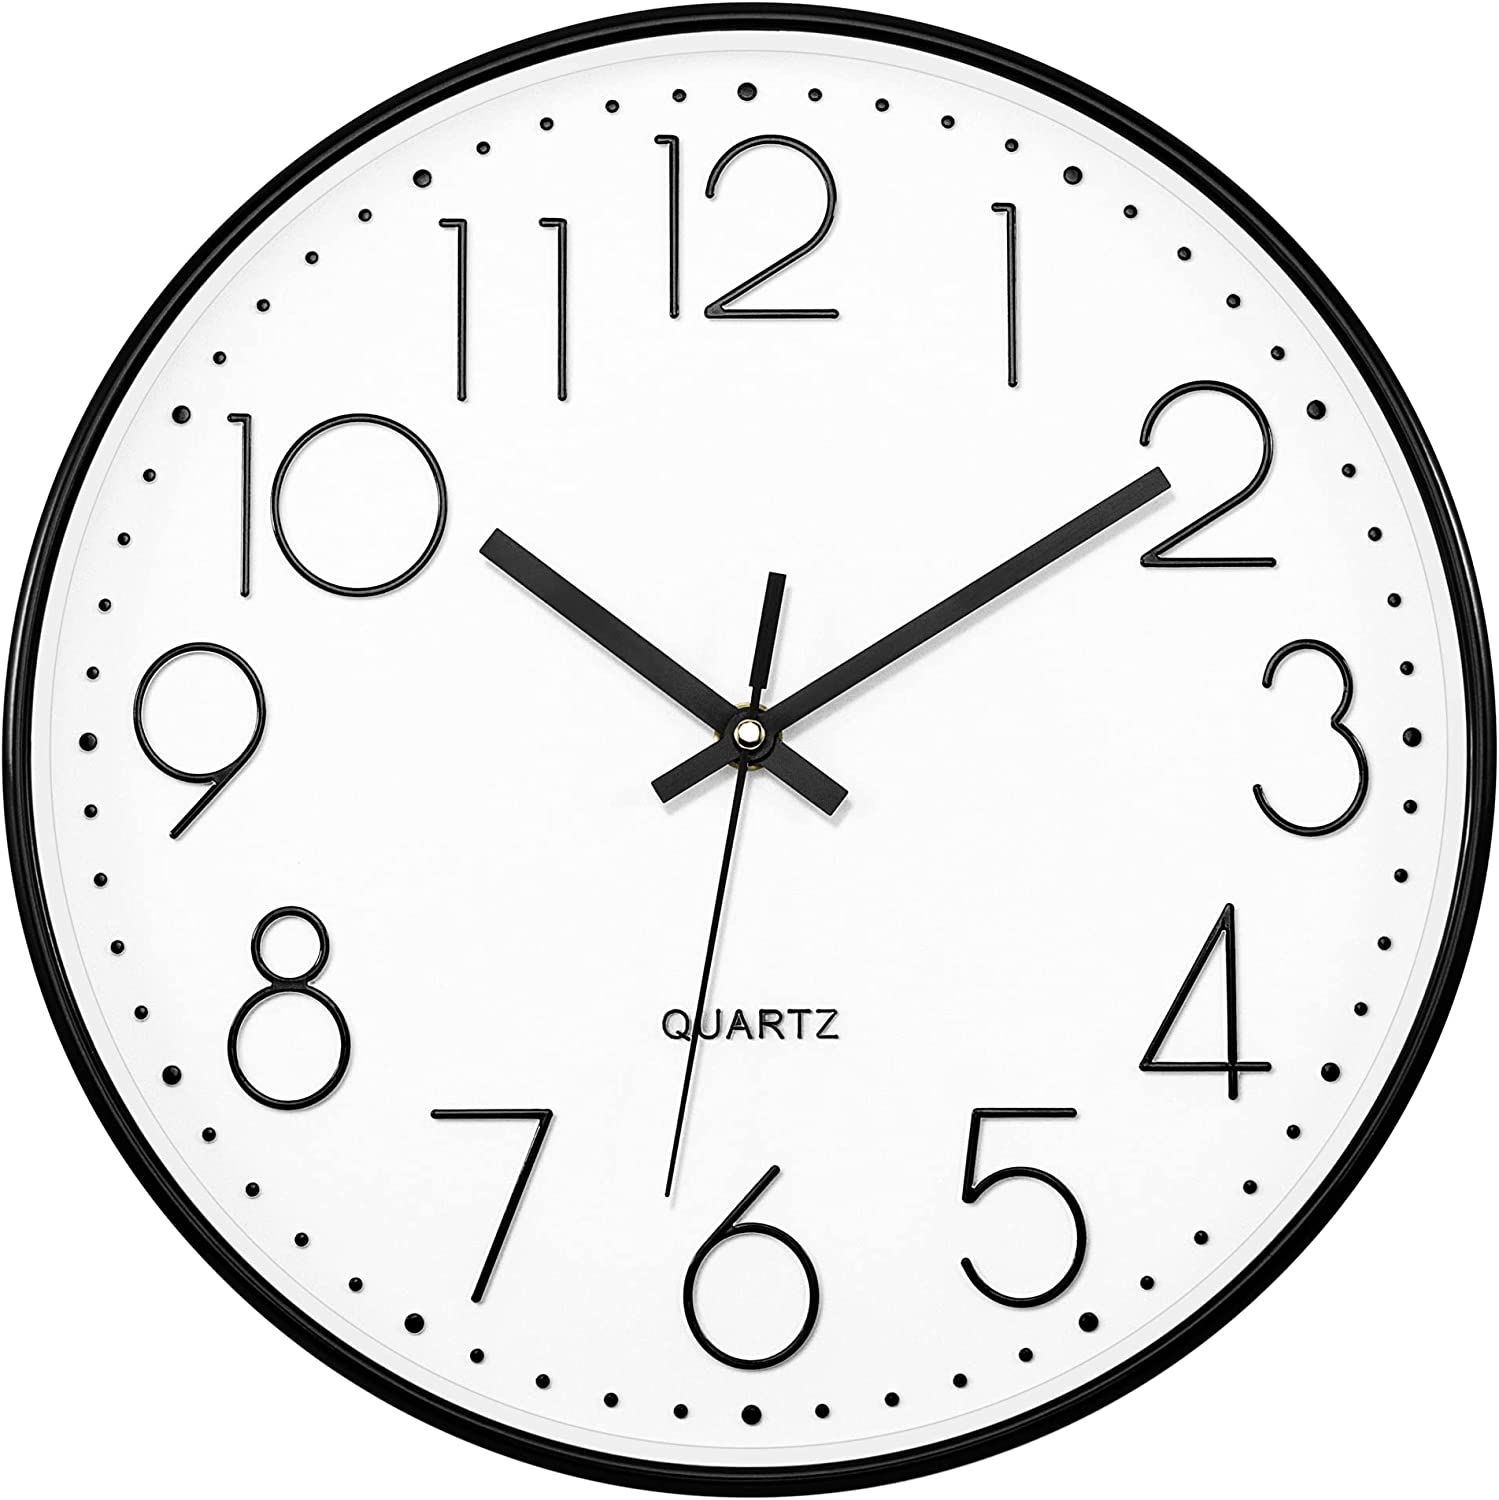 12 inch, 30 cm Foxtop Modern Wall Clock Silent Non-Ticking Decorative Silver Wall Clock Battery Operated for Office School Home Living Room 